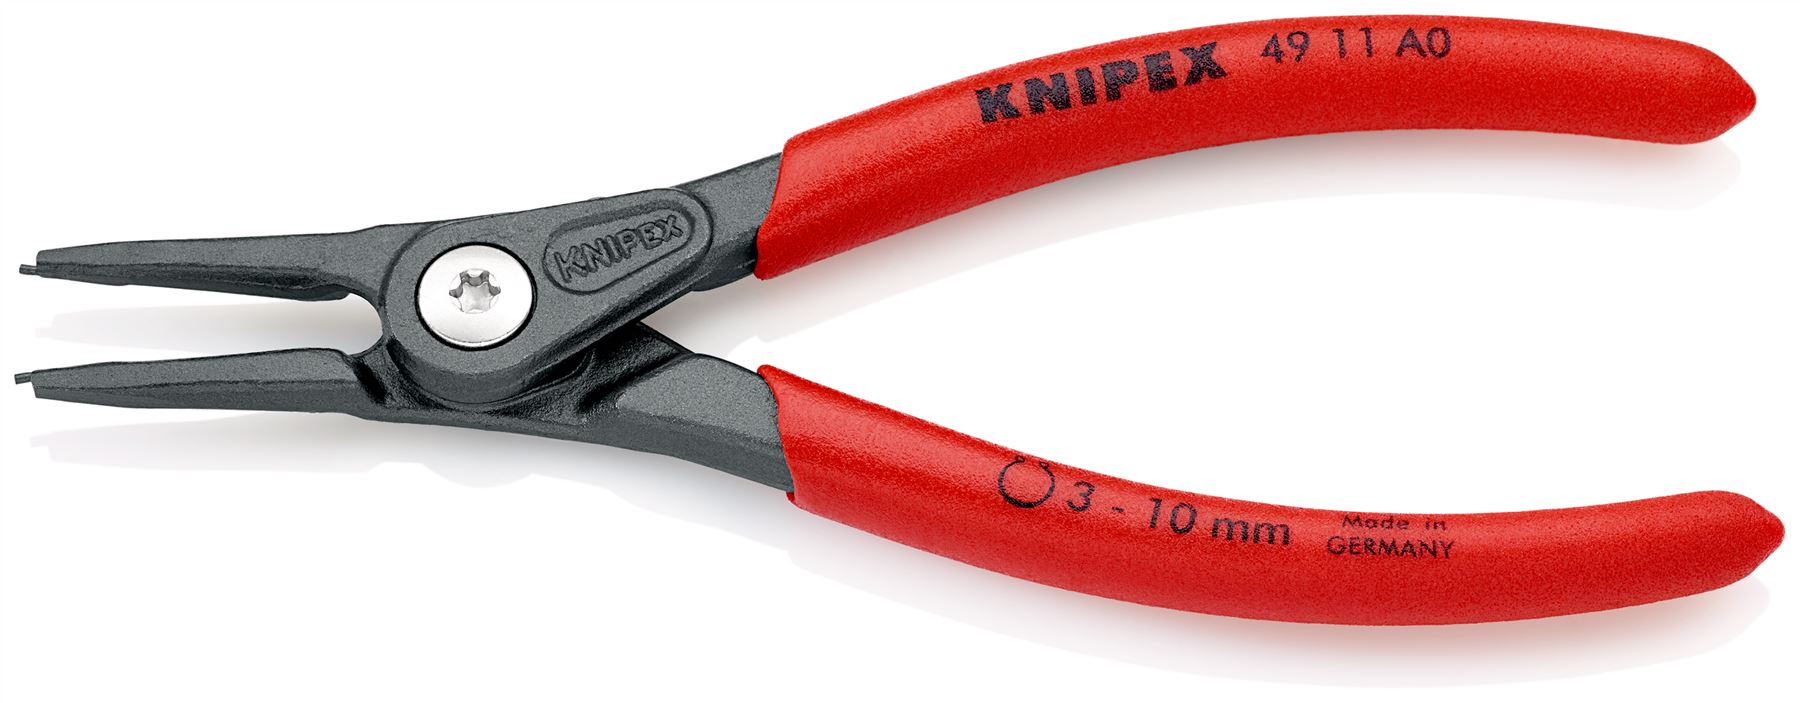 KNIPEX Precision Circlip Pliers for External Circlips on Shafts 140mm 0.9mm Diameter Tips 49 11 A0